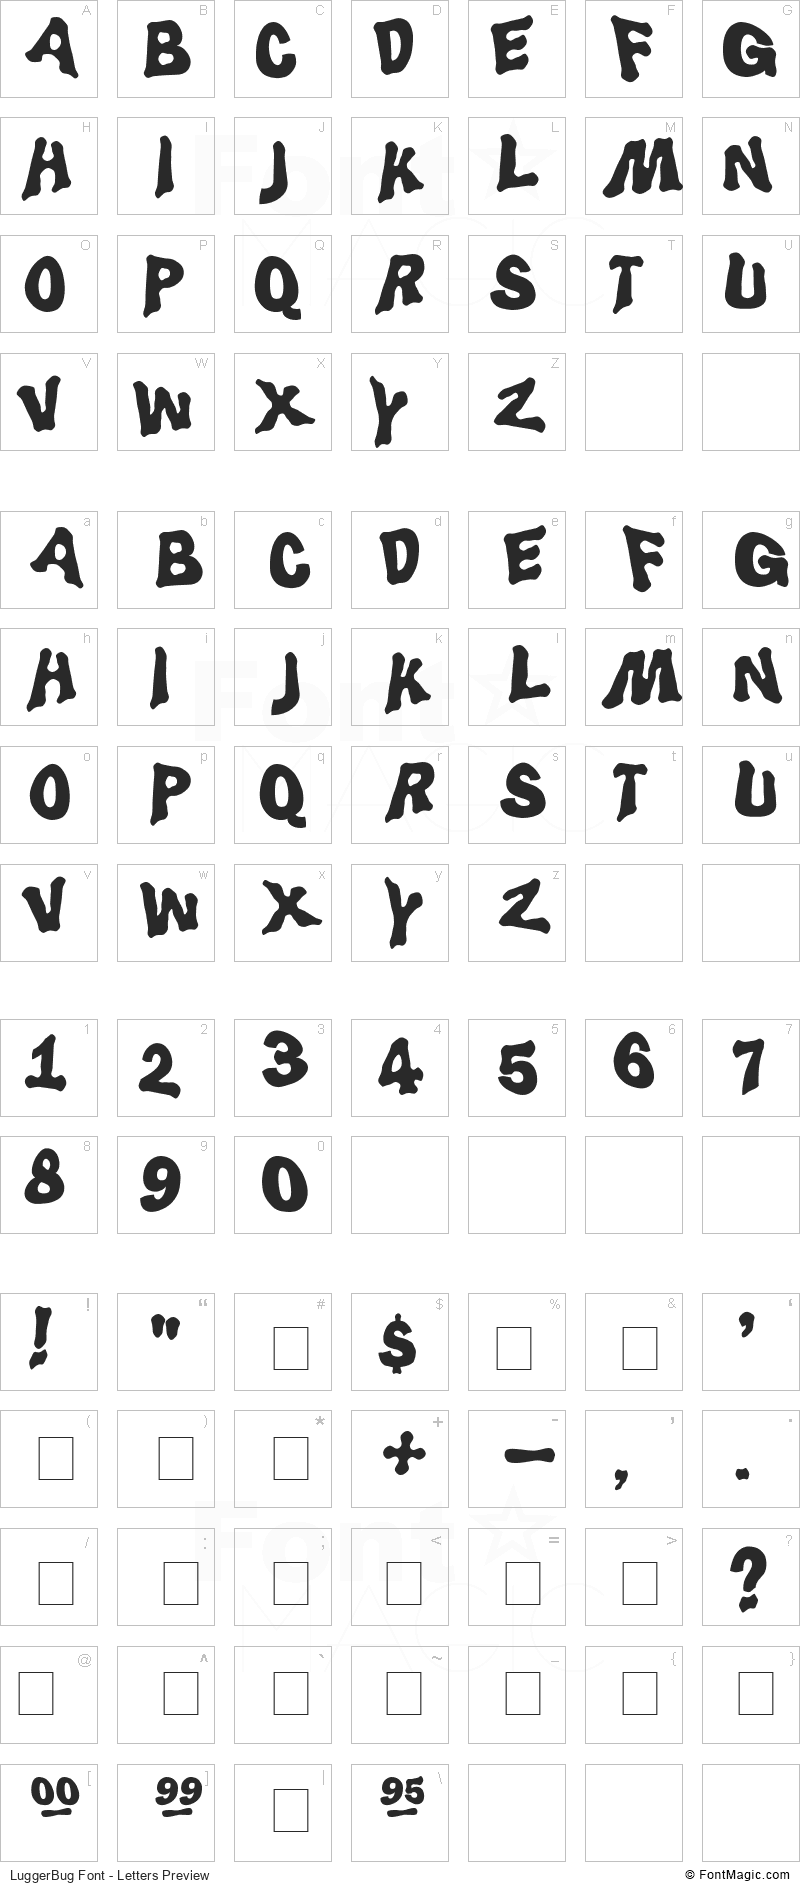 LuggerBug Font - All Latters Preview Chart